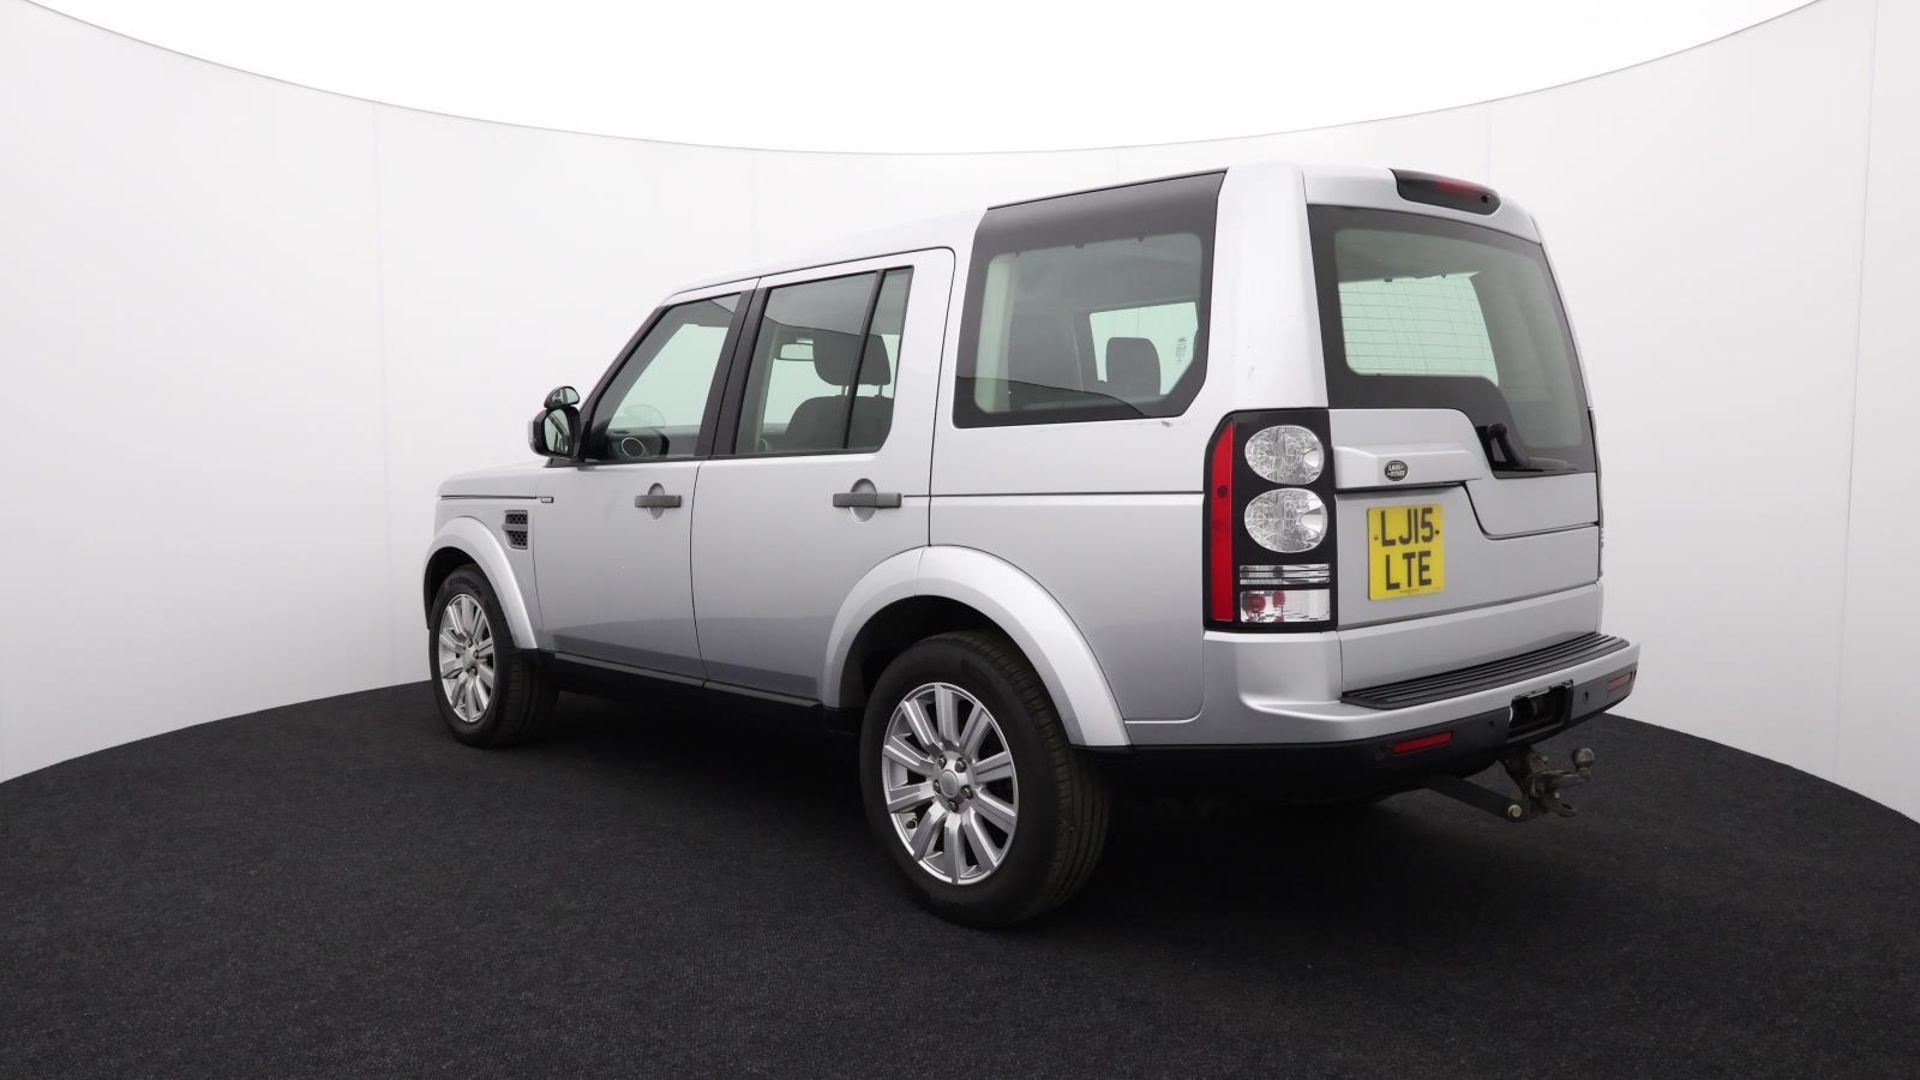 Land Rover Discovery SDV6 SE - 2015 - Automatic - Diesel - 2993cc 6 Cylinder engine - LJ15 LTE - Image 17 of 44